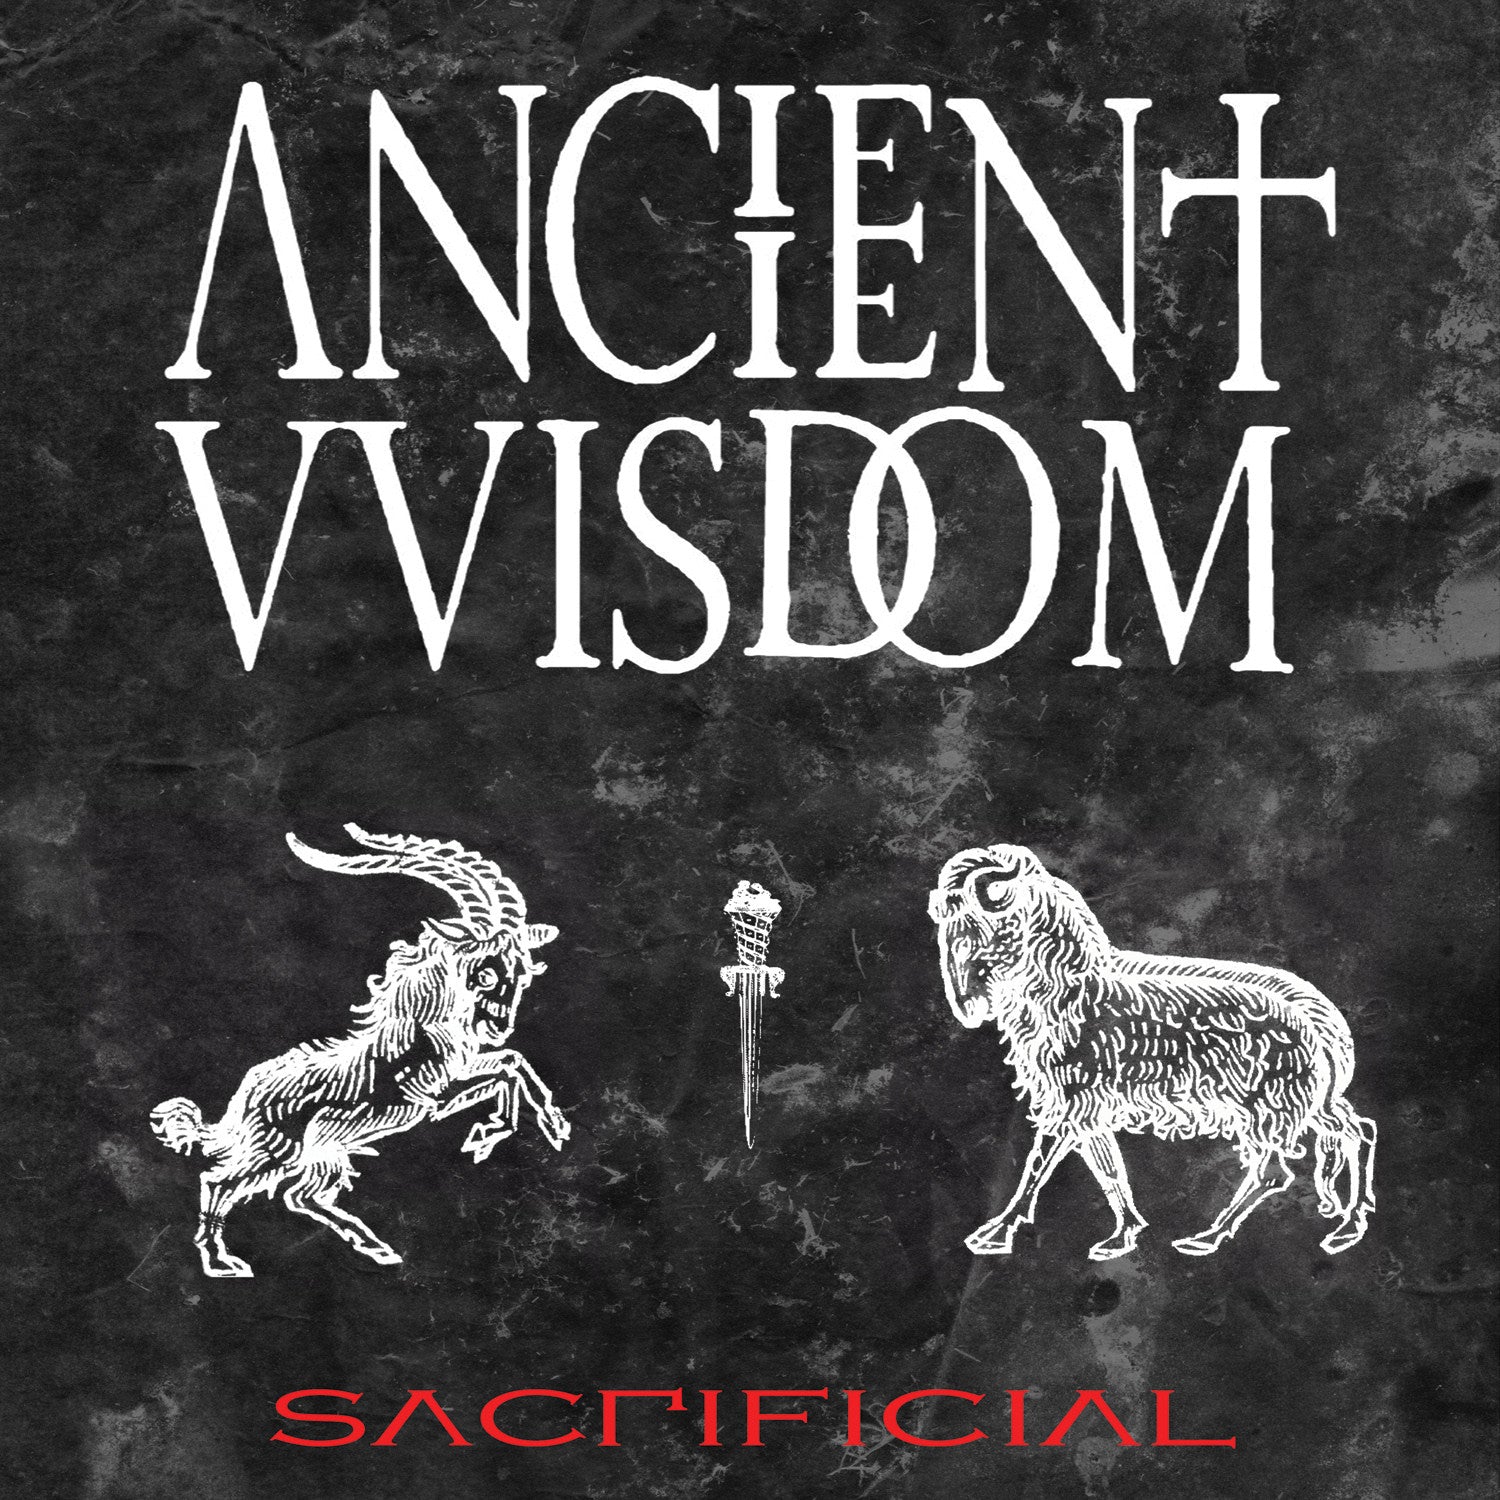 Ancient Wisdom - Sacrificial - New Vinyl Record 2014 Magic Bullet Records Limited Edition Clear Vinyl - Occult Rock / Neo-Folk (feat. members of Integrity!)